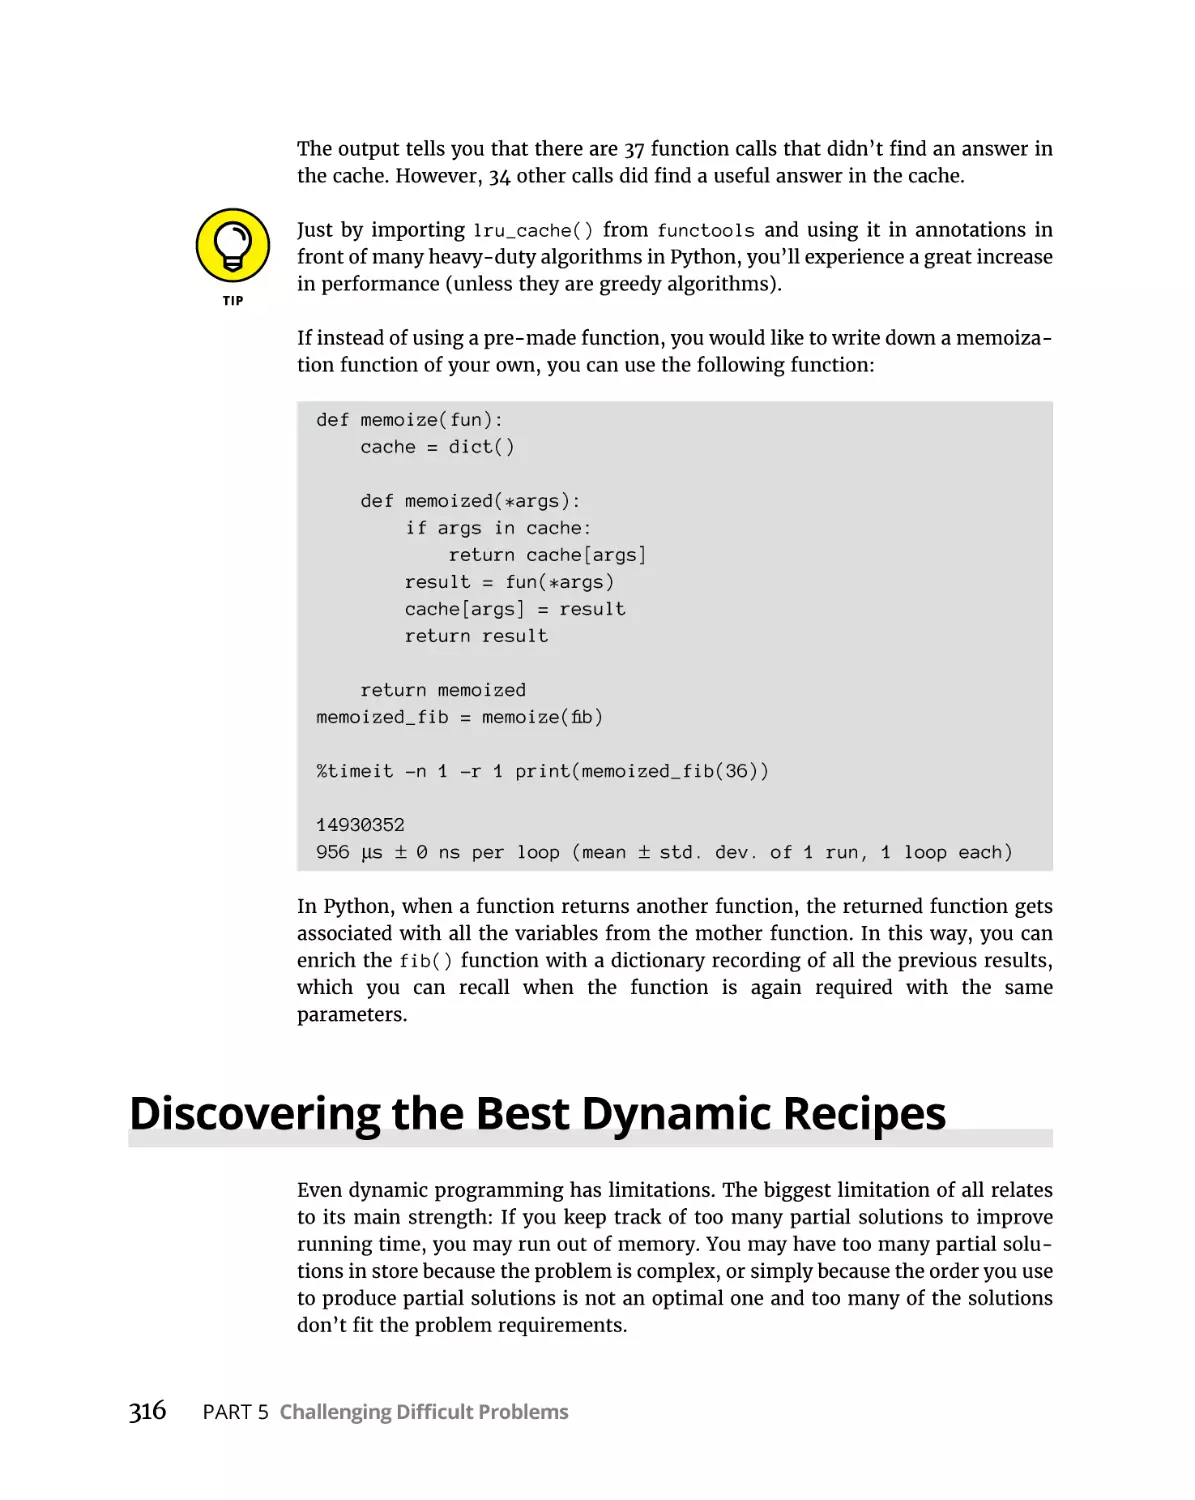 Discovering the Best Dynamic Recipes